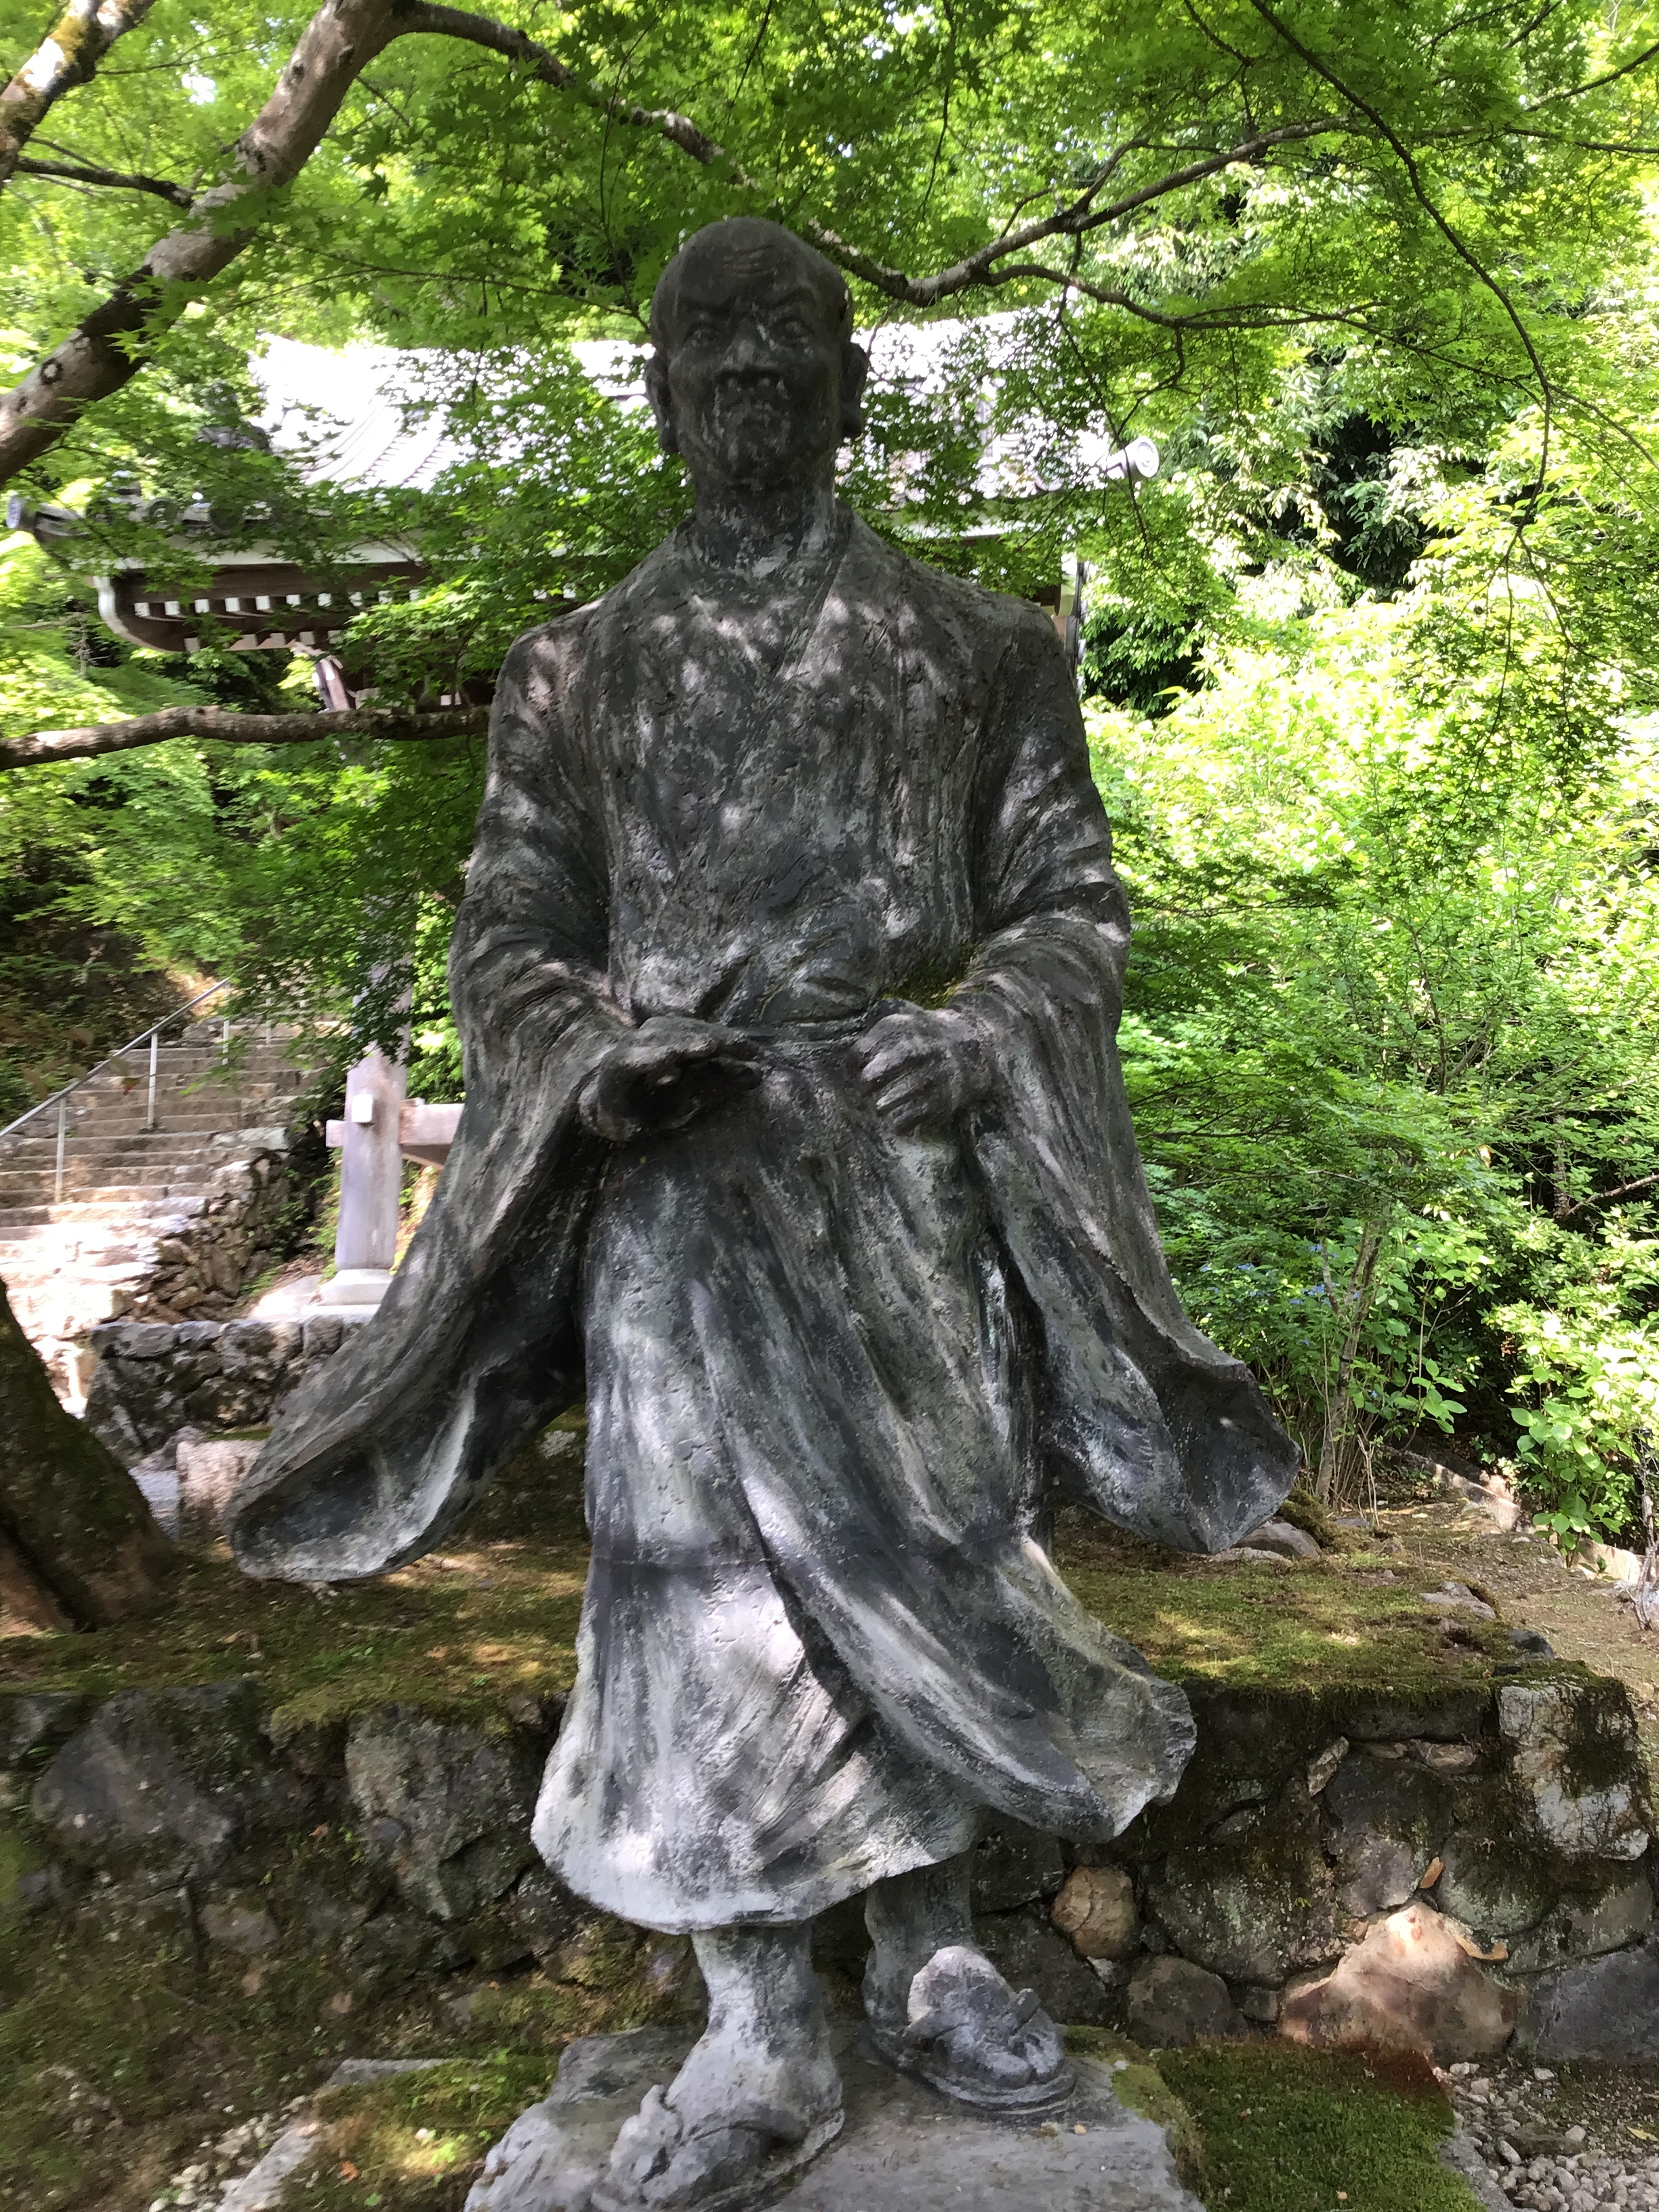 A statue sitting in the shade